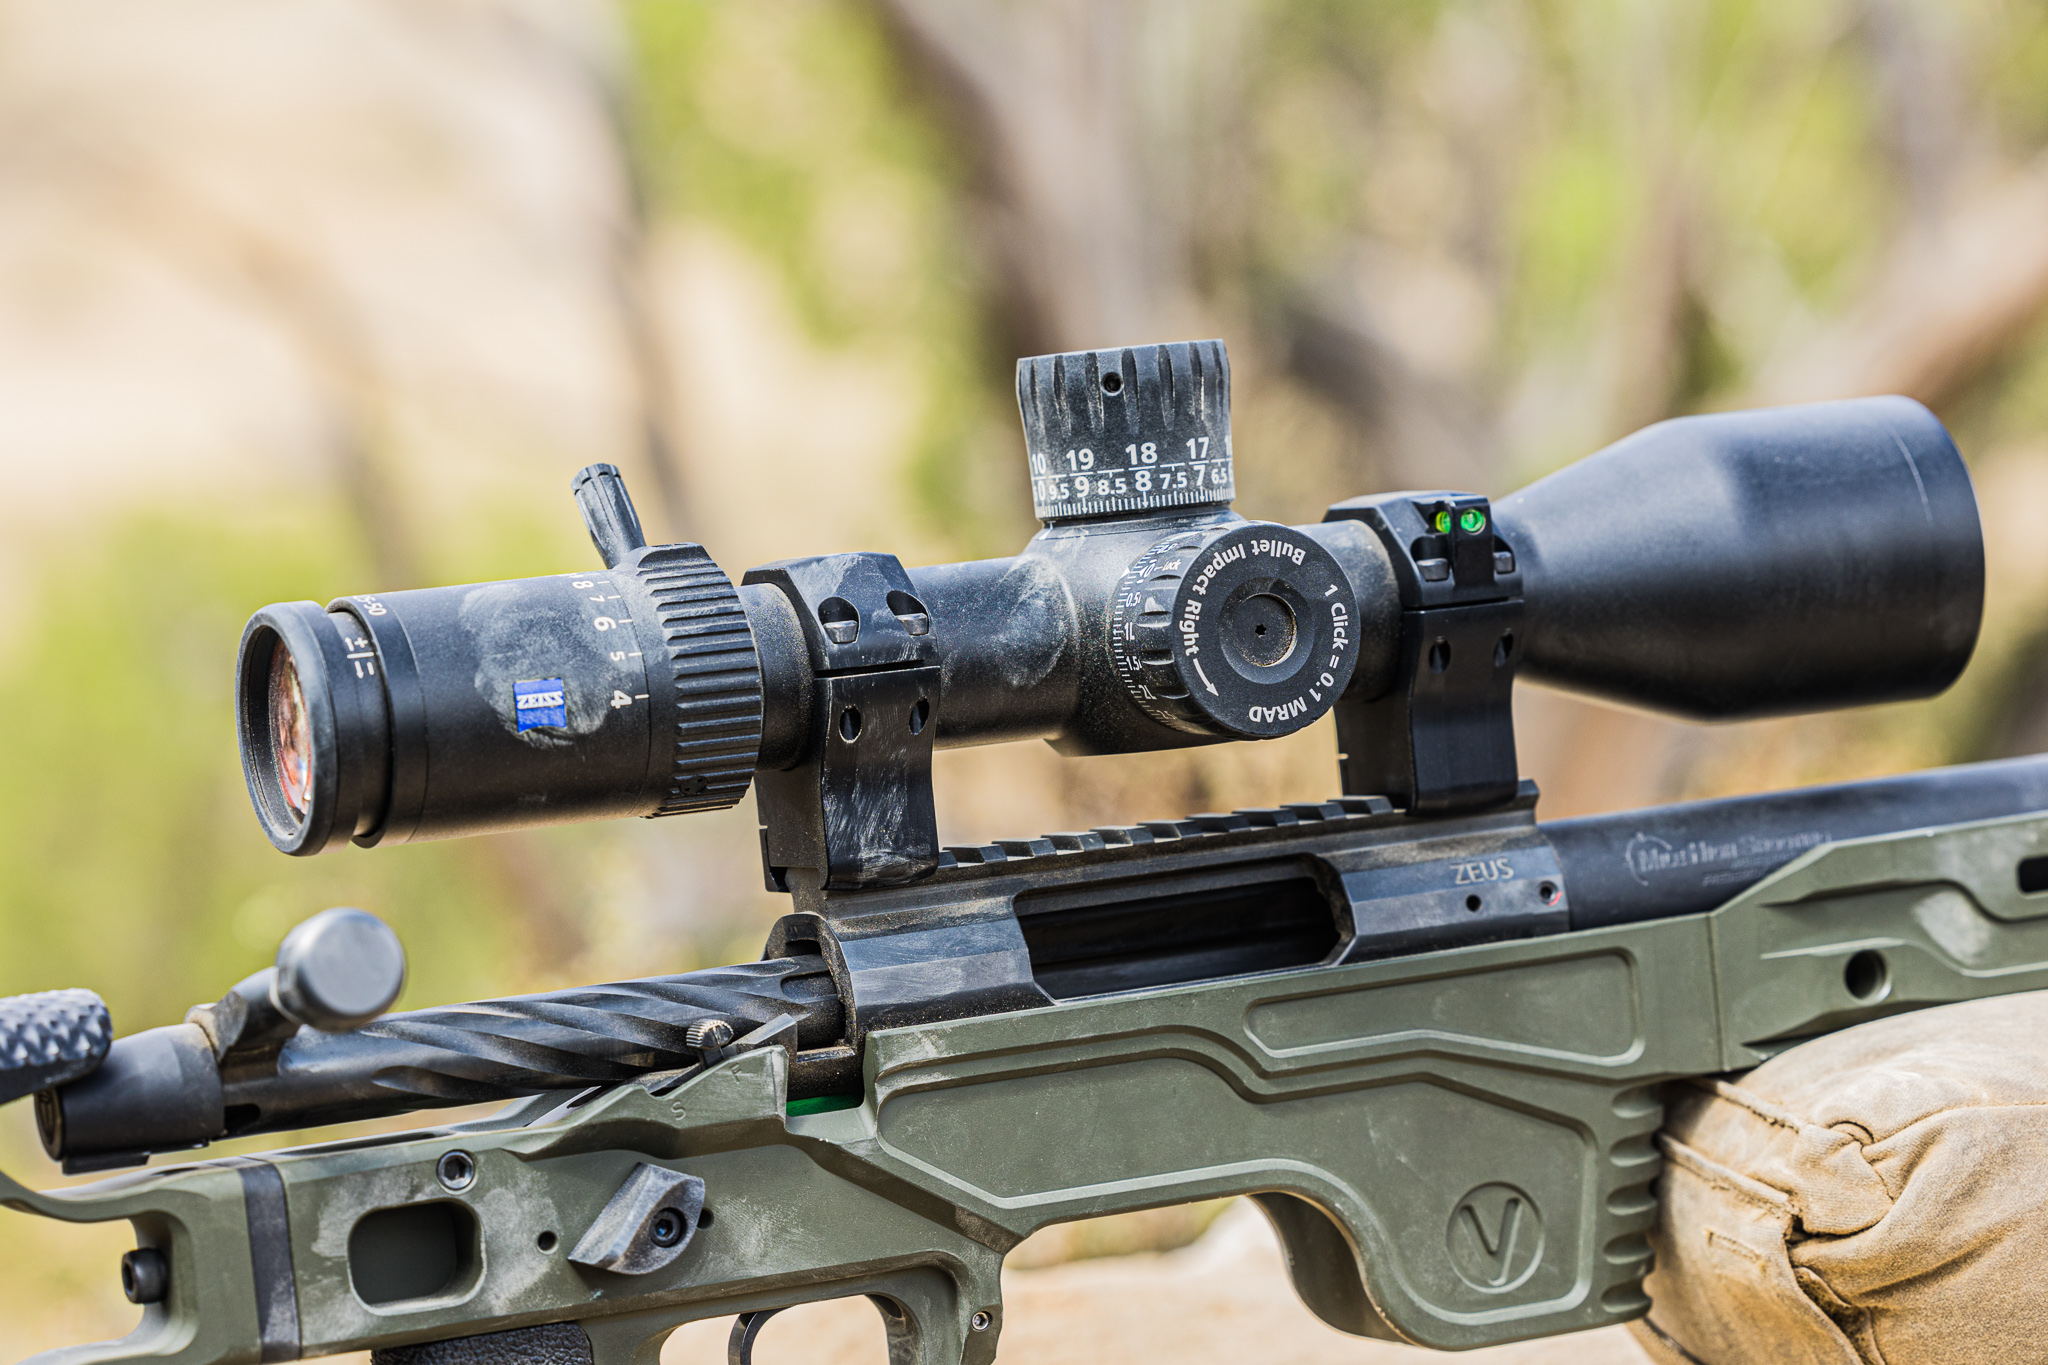 Rifle Scopes - Zeiss LRP S3 New First Focal Plane Riflescopes for Long-Range Precision Shooting | Sniper's Hide Forum